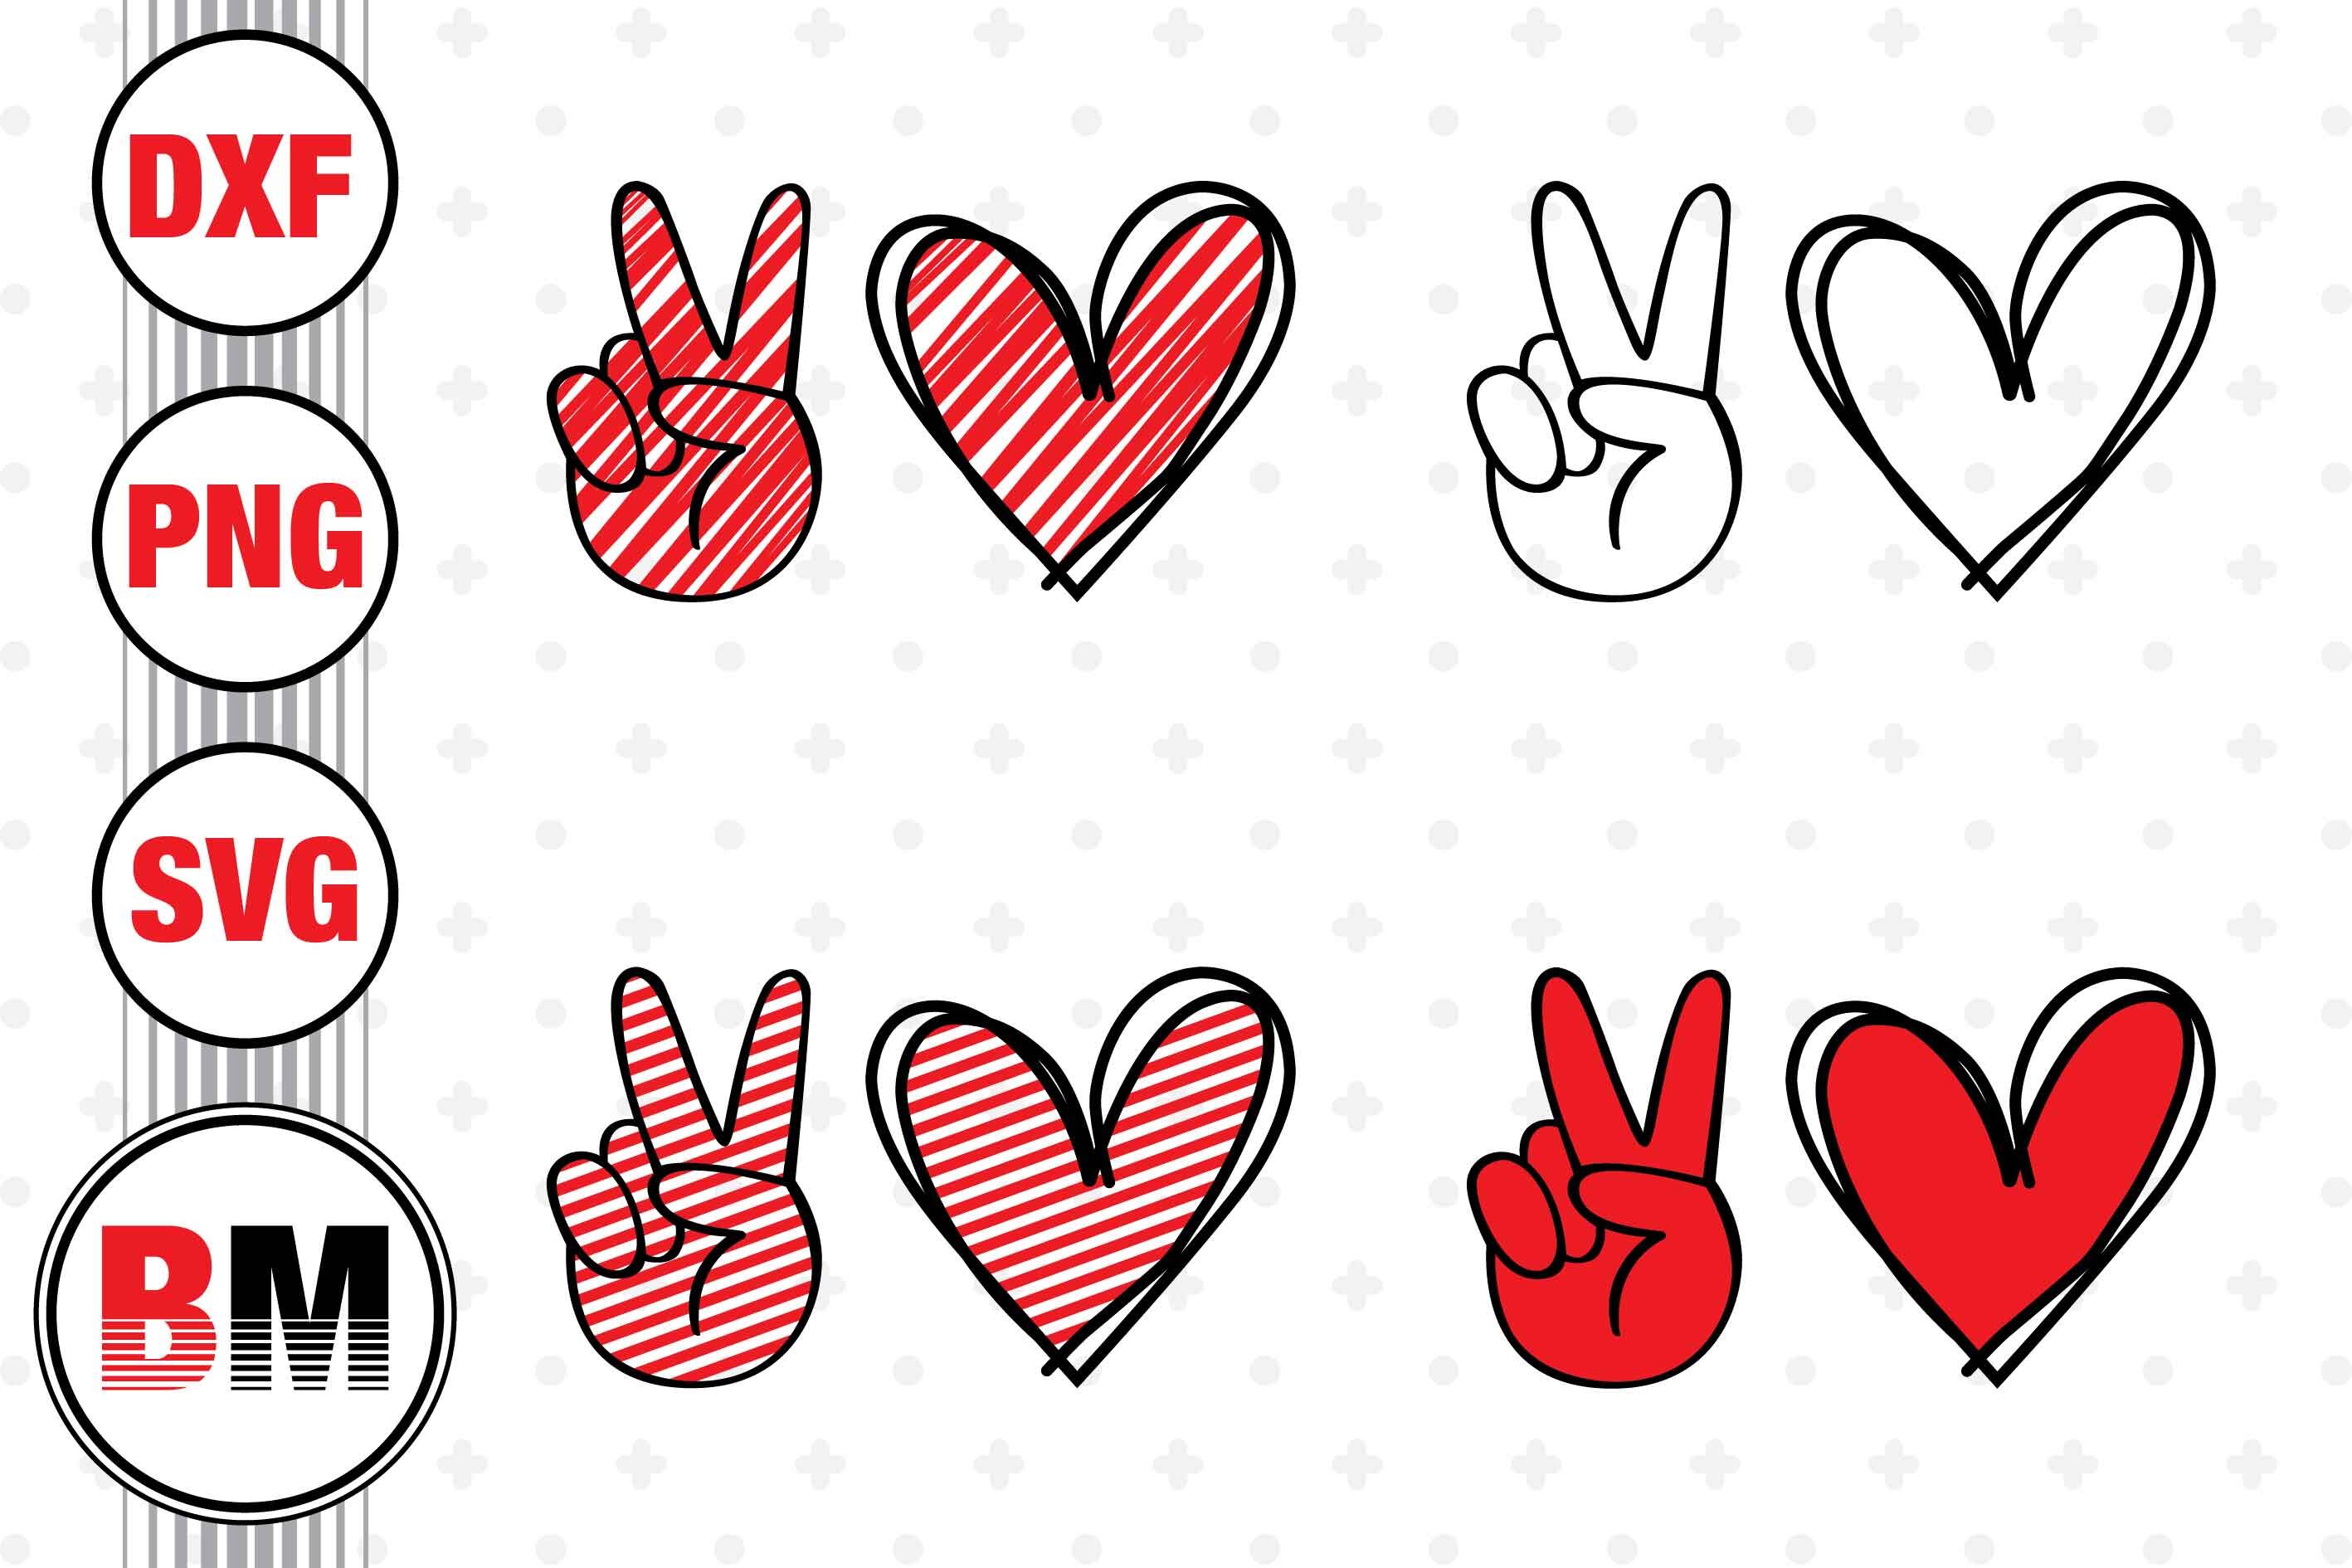 Peace Love SVG, PNG, DXF Files By Bmdesign | TheHungryJPEG.com